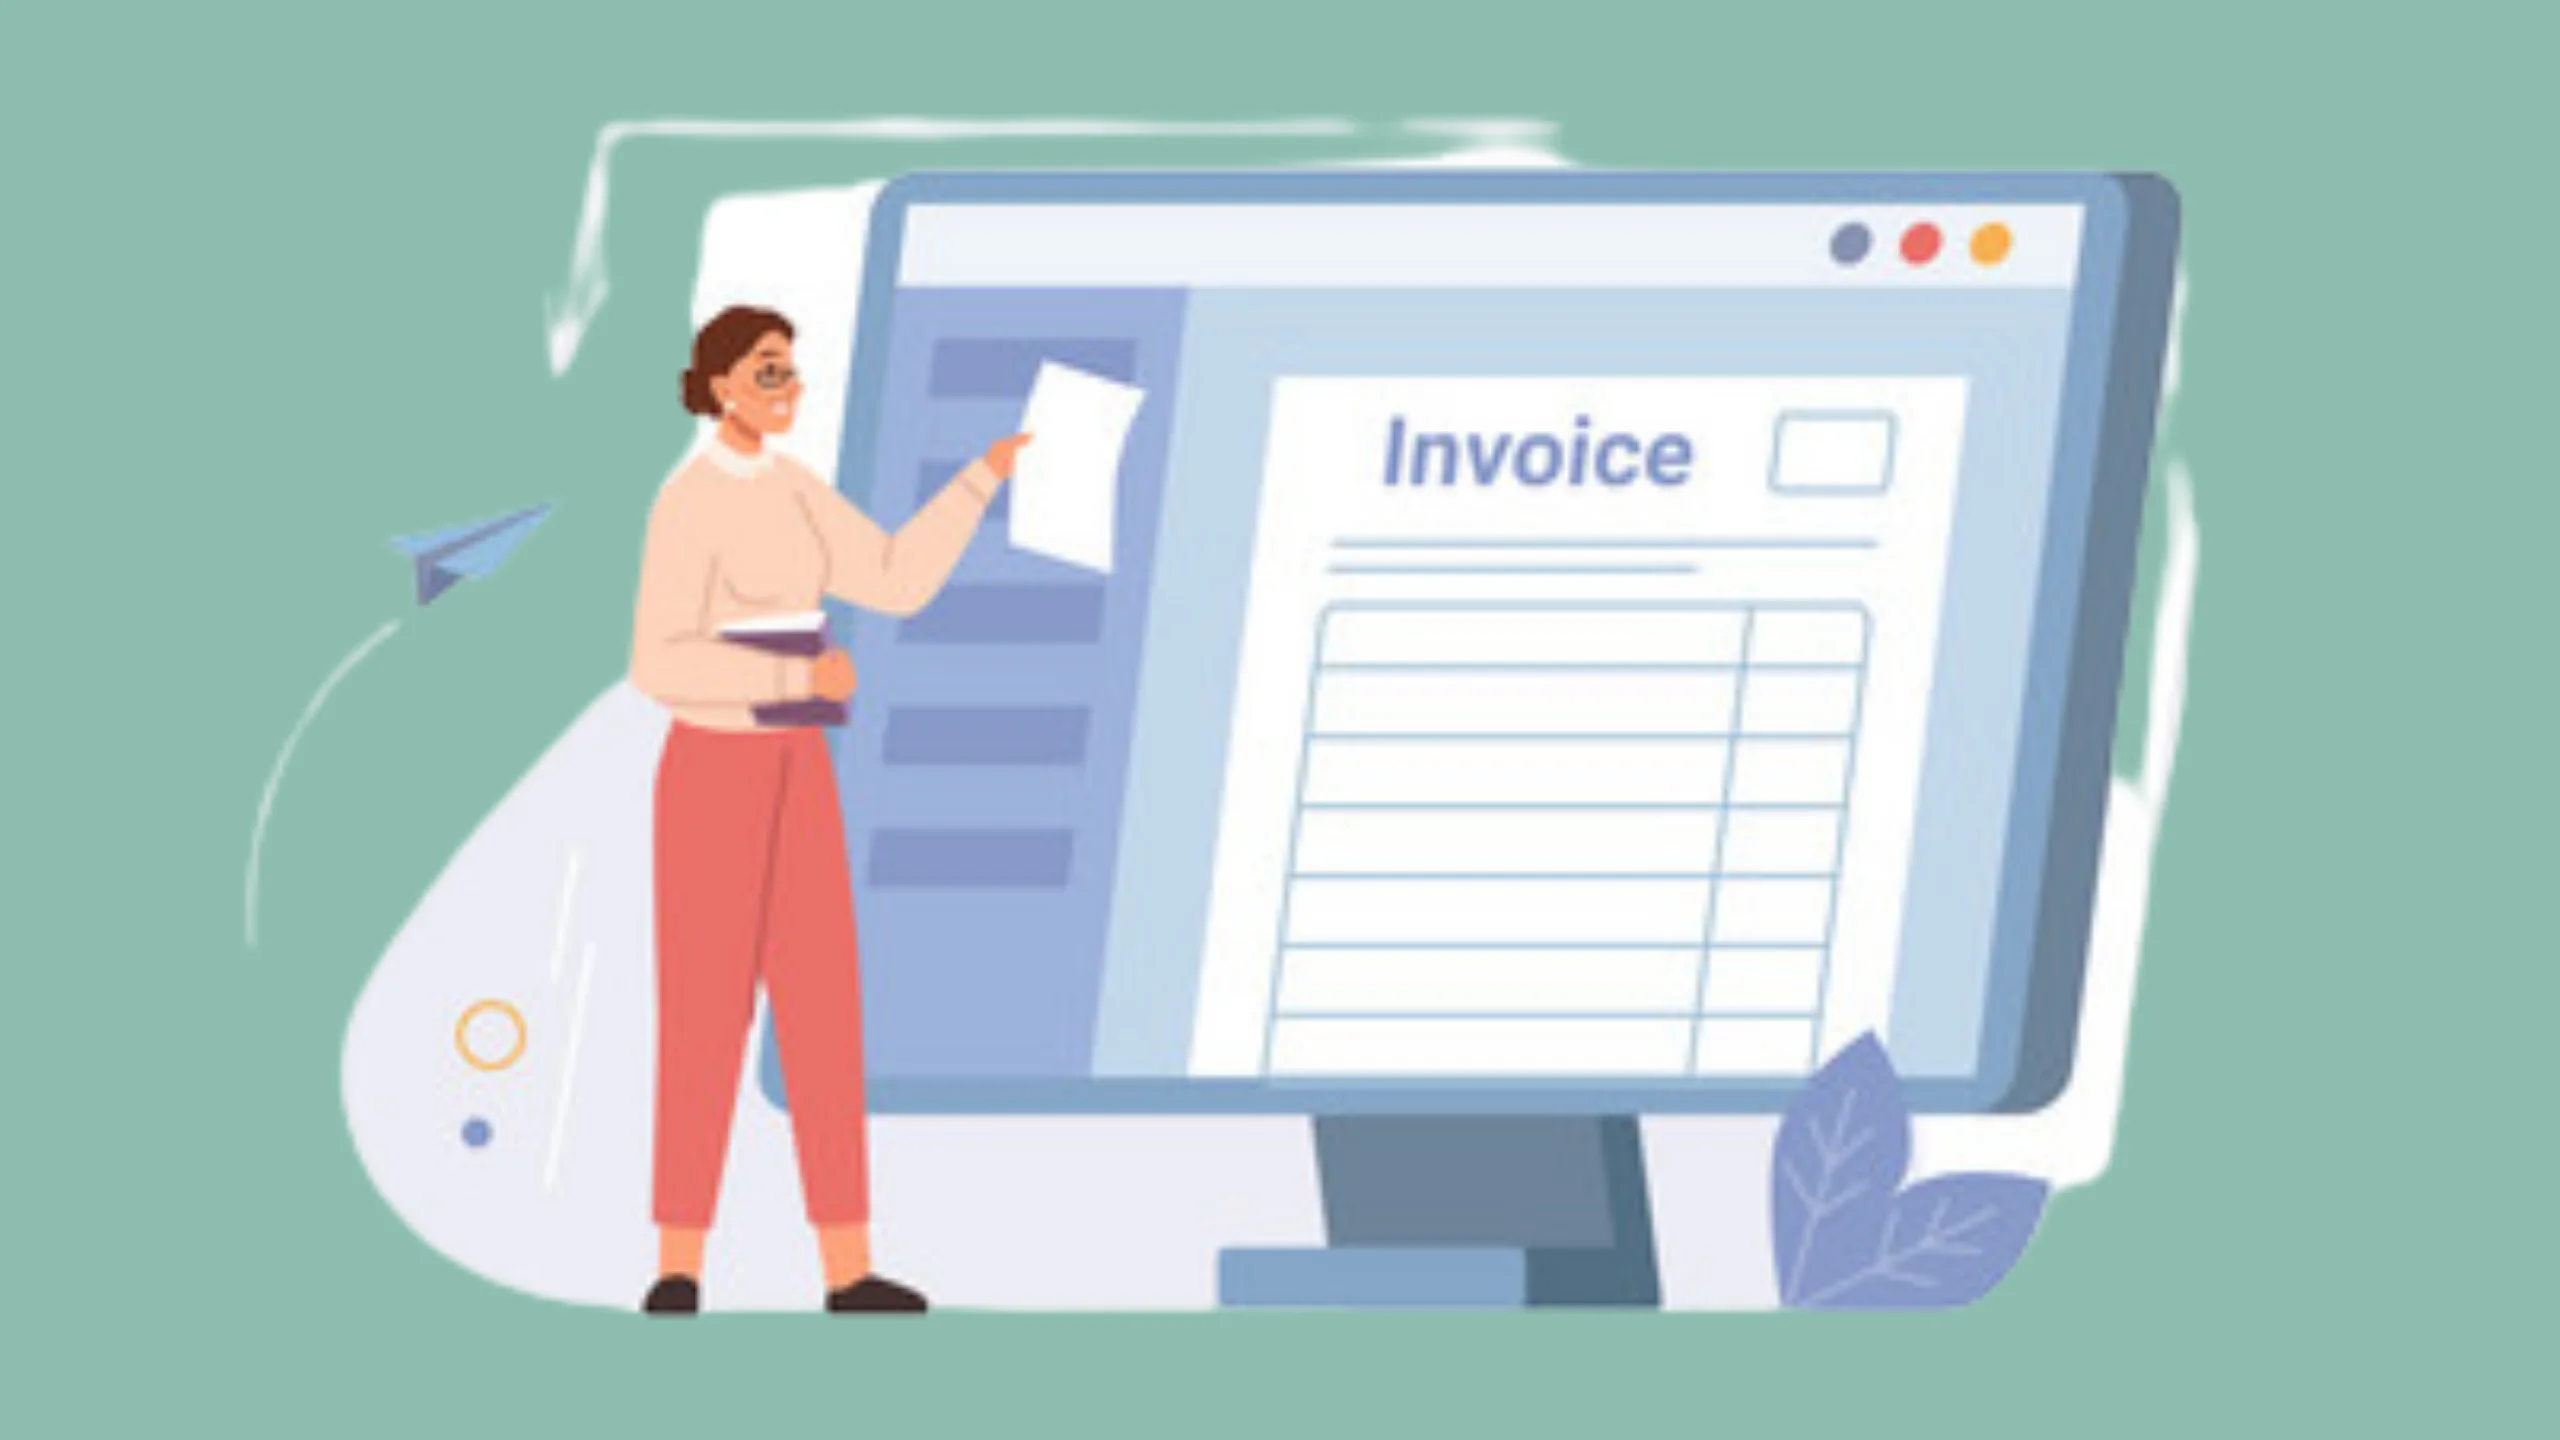 An invoice is a commercial document issued by a seller to a buyer, indicating the products, quantities, and agreed prices for goods or services provided.